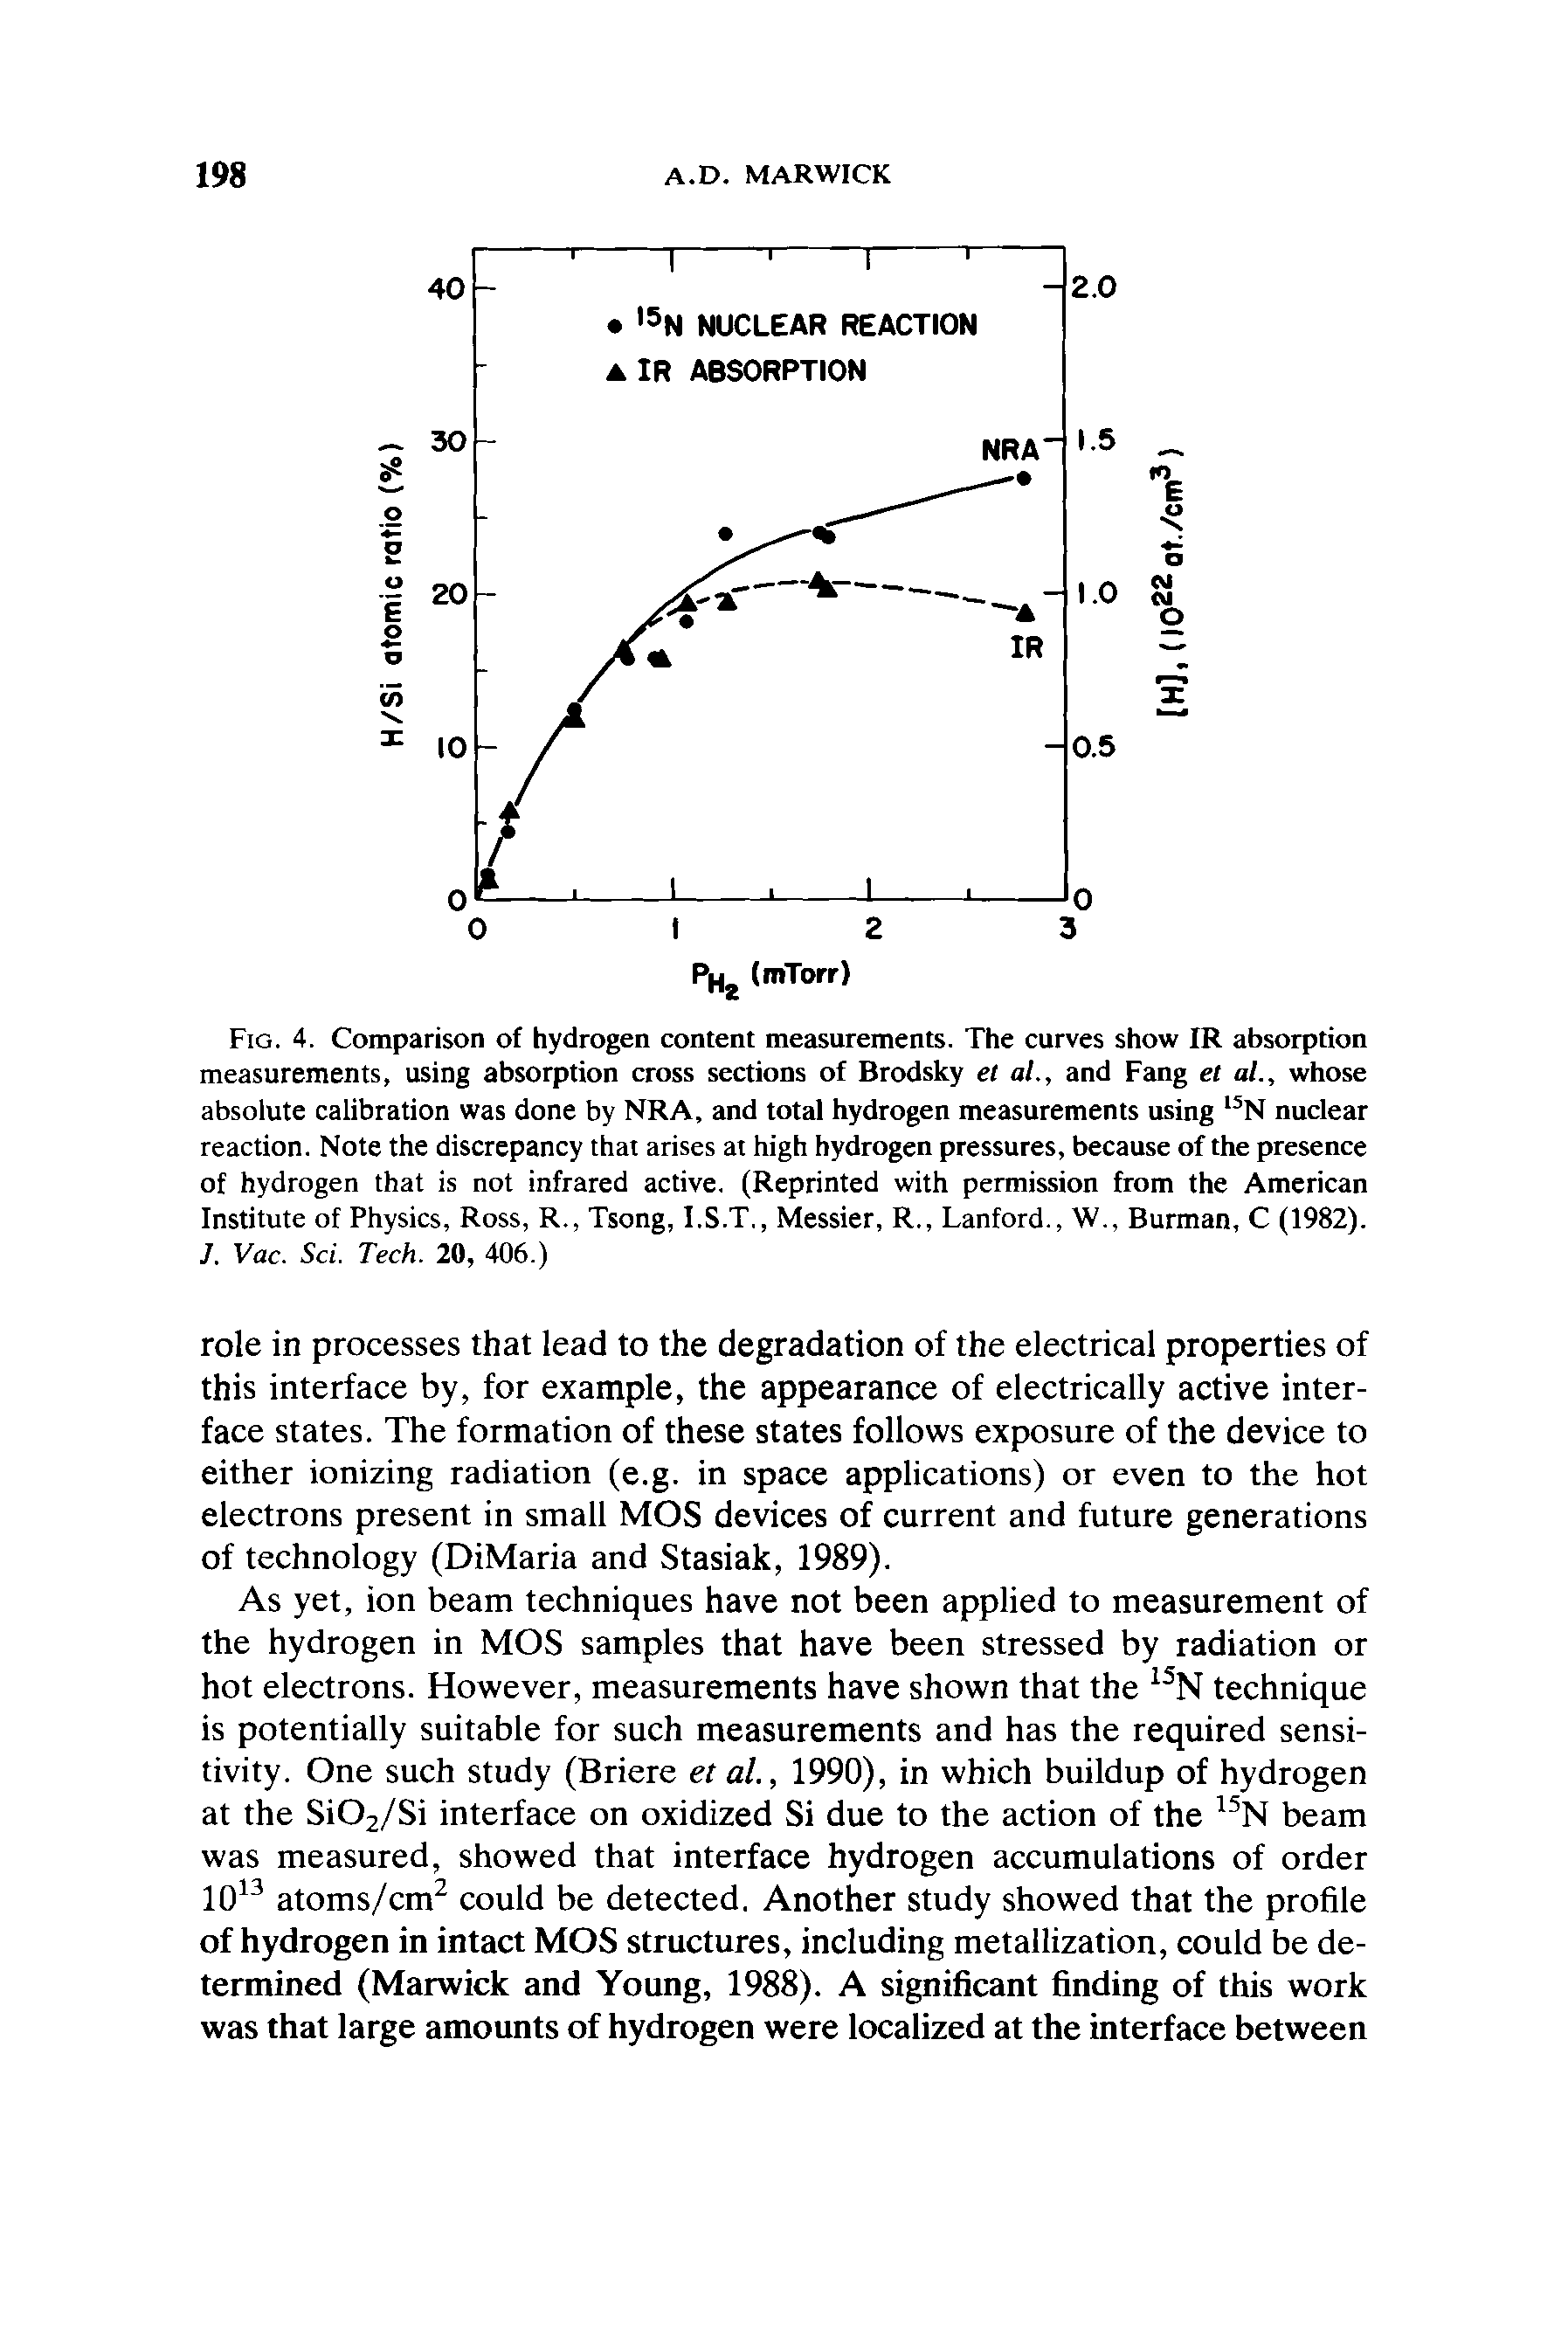 Fig. 4. Comparison of hydrogen content measurements. The curves show IR absorption measurements, using absorption cross sections of Brodsky el al., and Fang el al., whose absolute calibration was done by NRA, and total hydrogen measurements using 15N nuclear reaction. Note the discrepancy that arises at high hydrogen pressures, because of the presence of hydrogen that is not infrared active. (Reprinted with permission from the American Institute of Physics, Ross, R., Tsong, I.S.T., Messier, R., Lanford., W., Burman, C (1982). J. Vac. Sci. Tech. 20, 406.)...